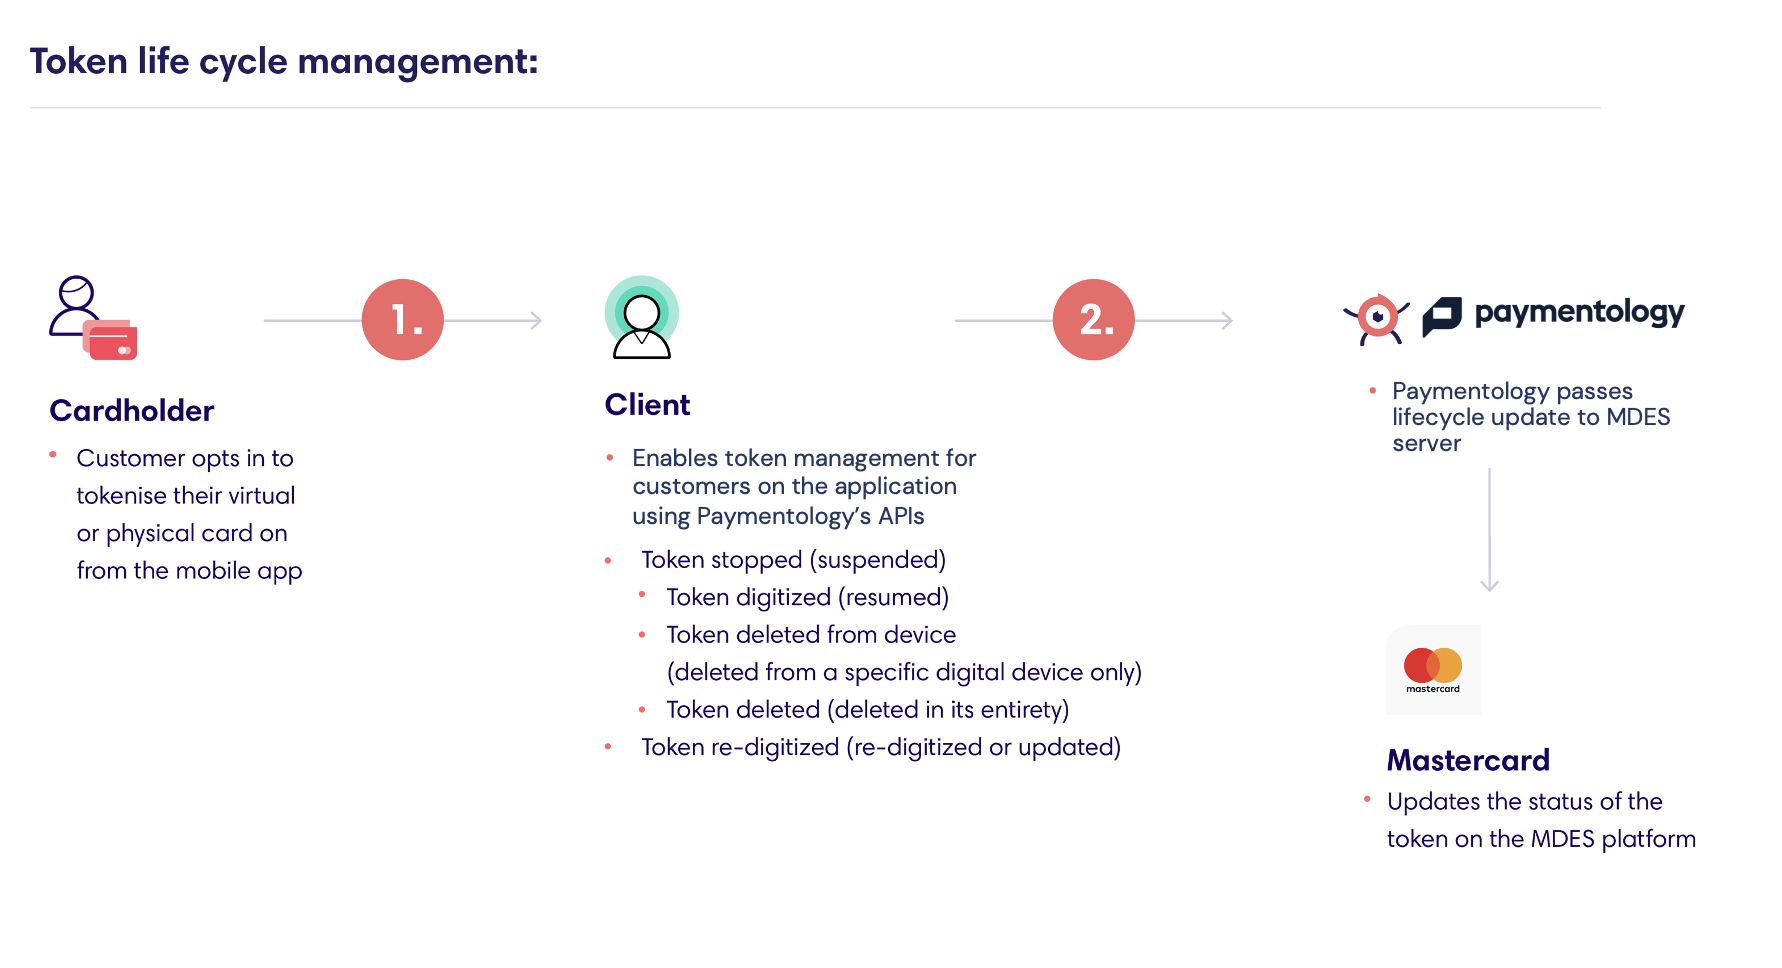 Token lofecycle management flow